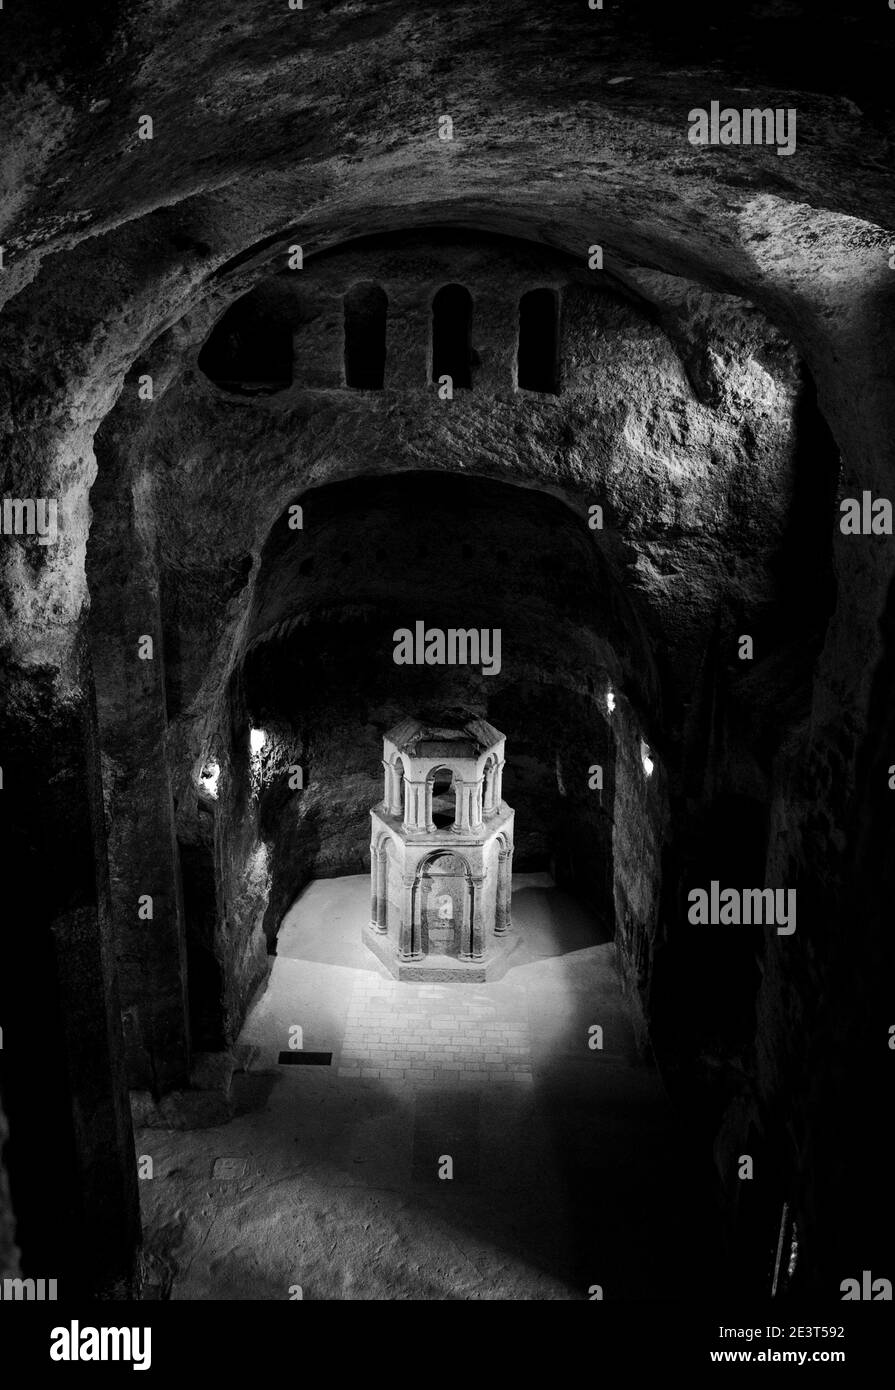 AUBETERRE-SUR-DRONNE, FRANCE. Subterranean monolithic church of Saint-Jean carved into a cliff - the largest underground church. Black white photo Stock Photo